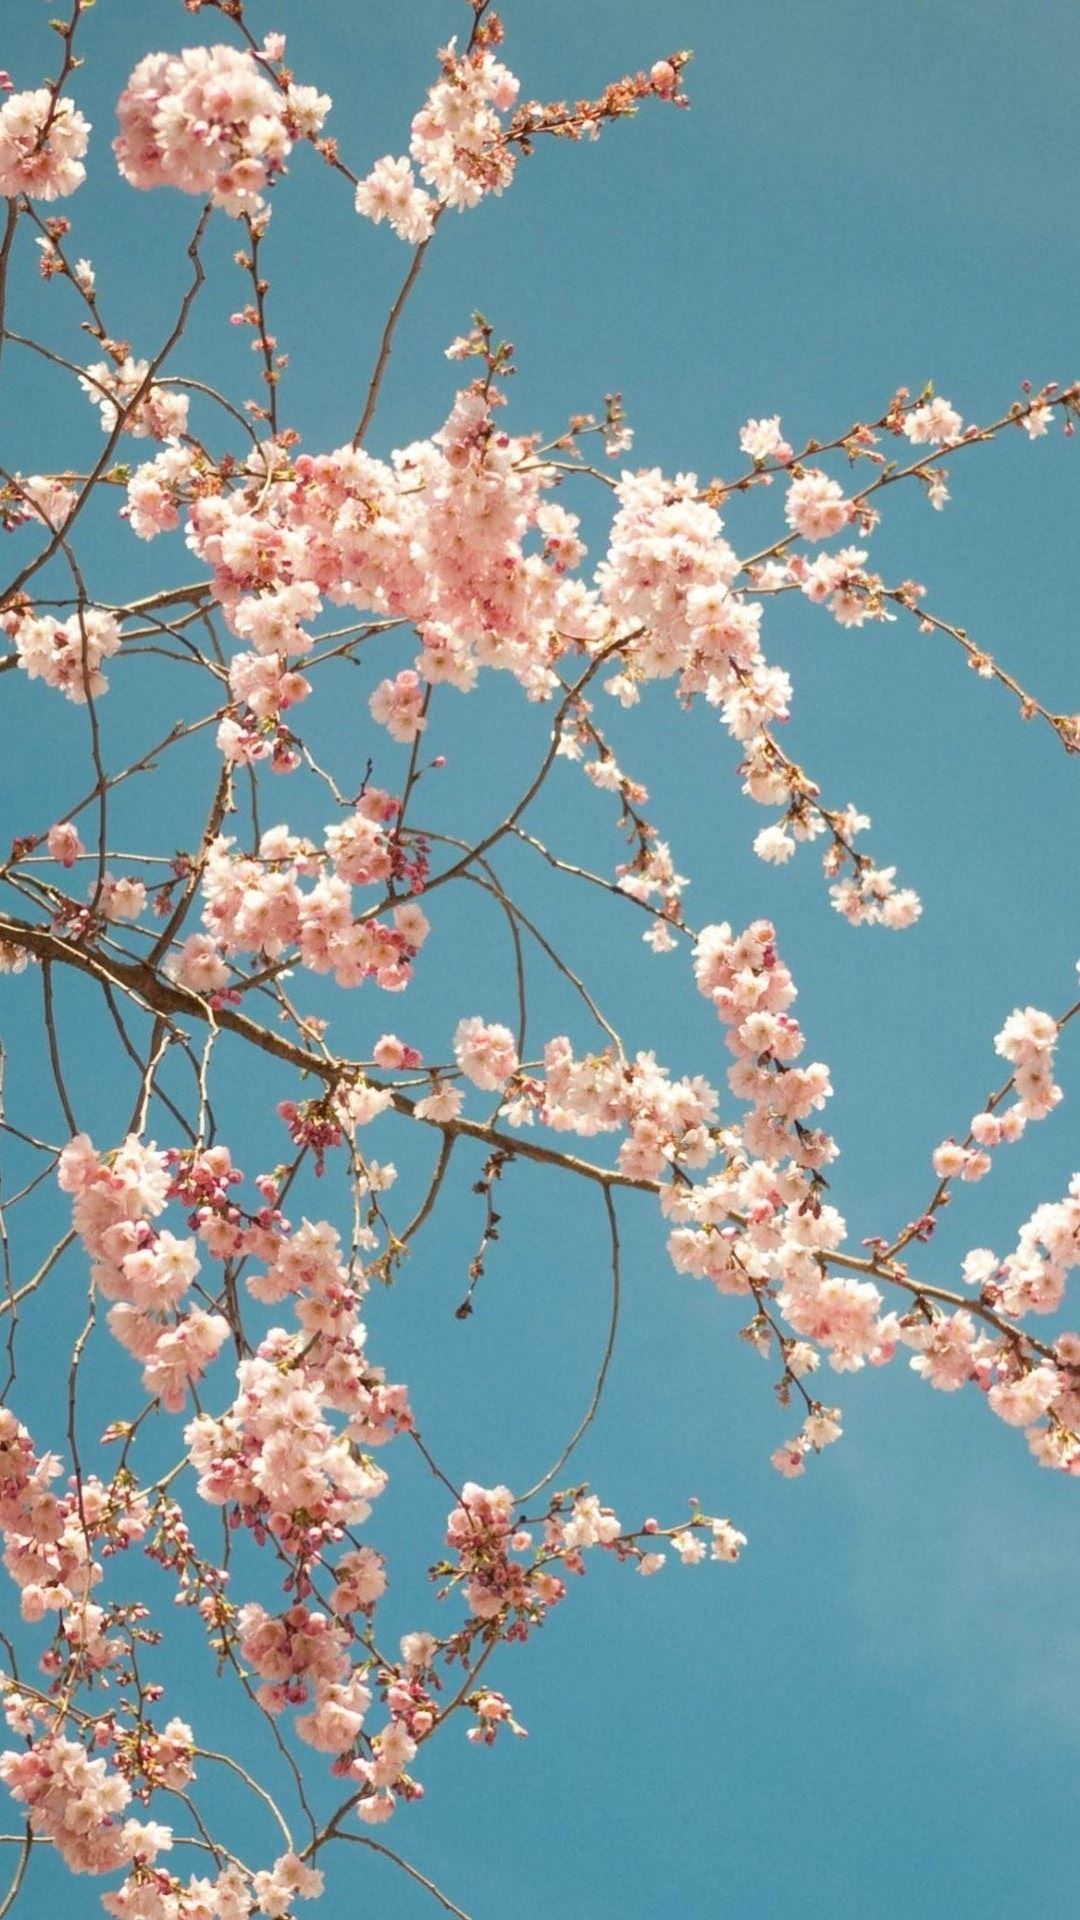 A beautiful wallpaper of cherry blossoms on a blue sky background - Cherry blossom